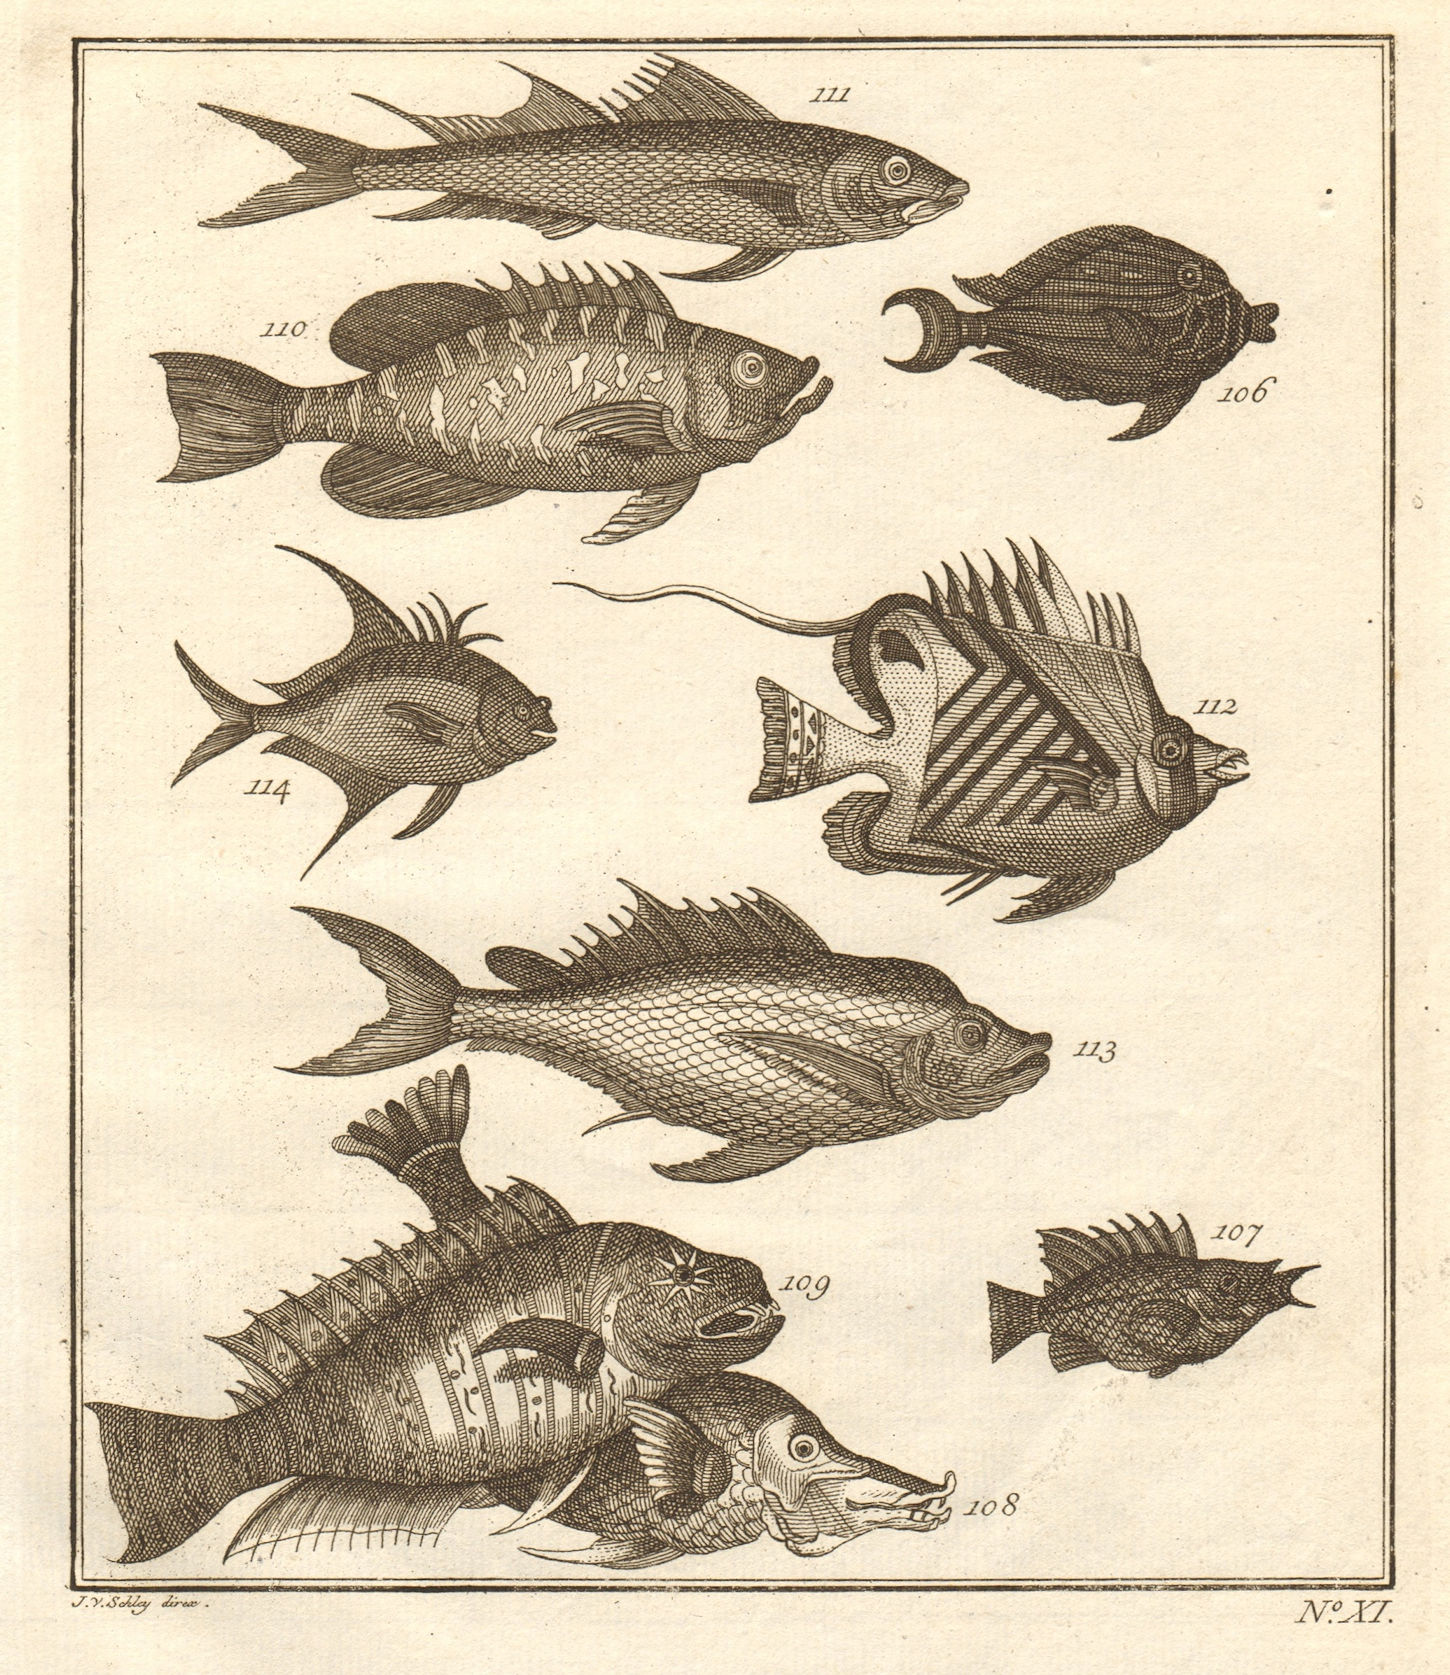 Associate Product XI. Poissons d'Ambione. Indonesia Moluccas Maluku tropical fish. SCHLEY 1763